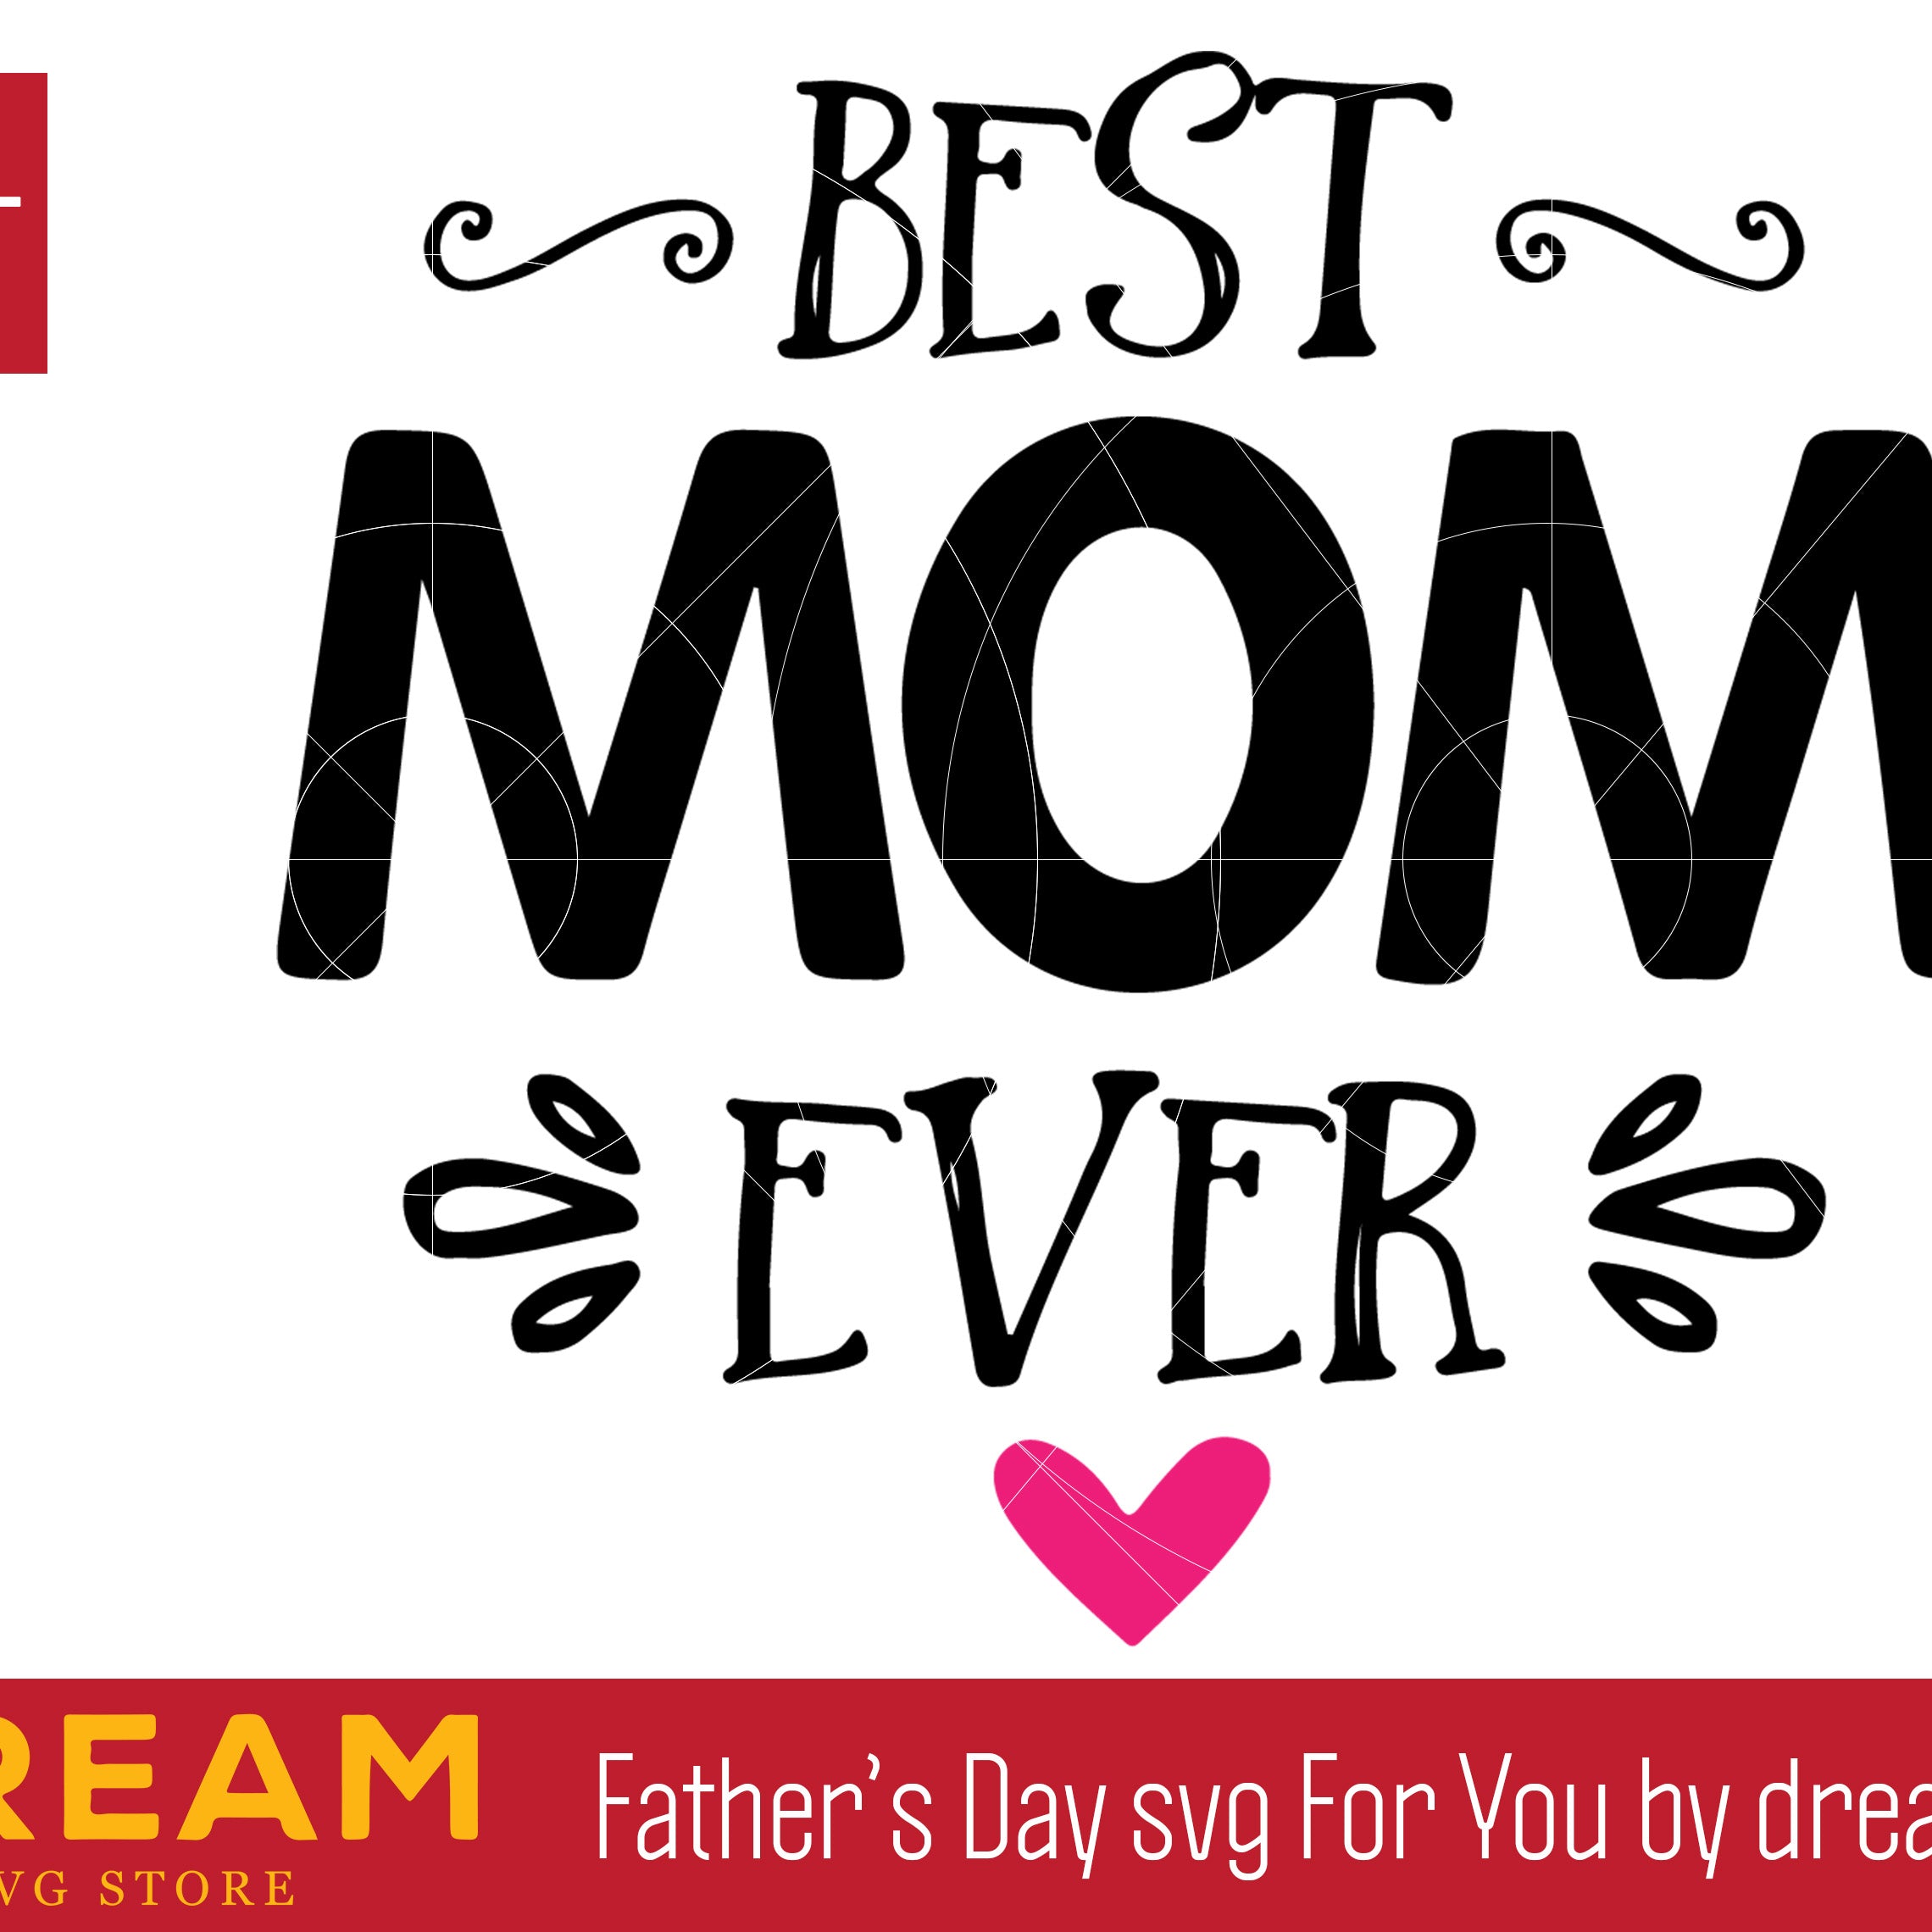 Best mama ever svg, Mother's day svg, eps, png, dxf